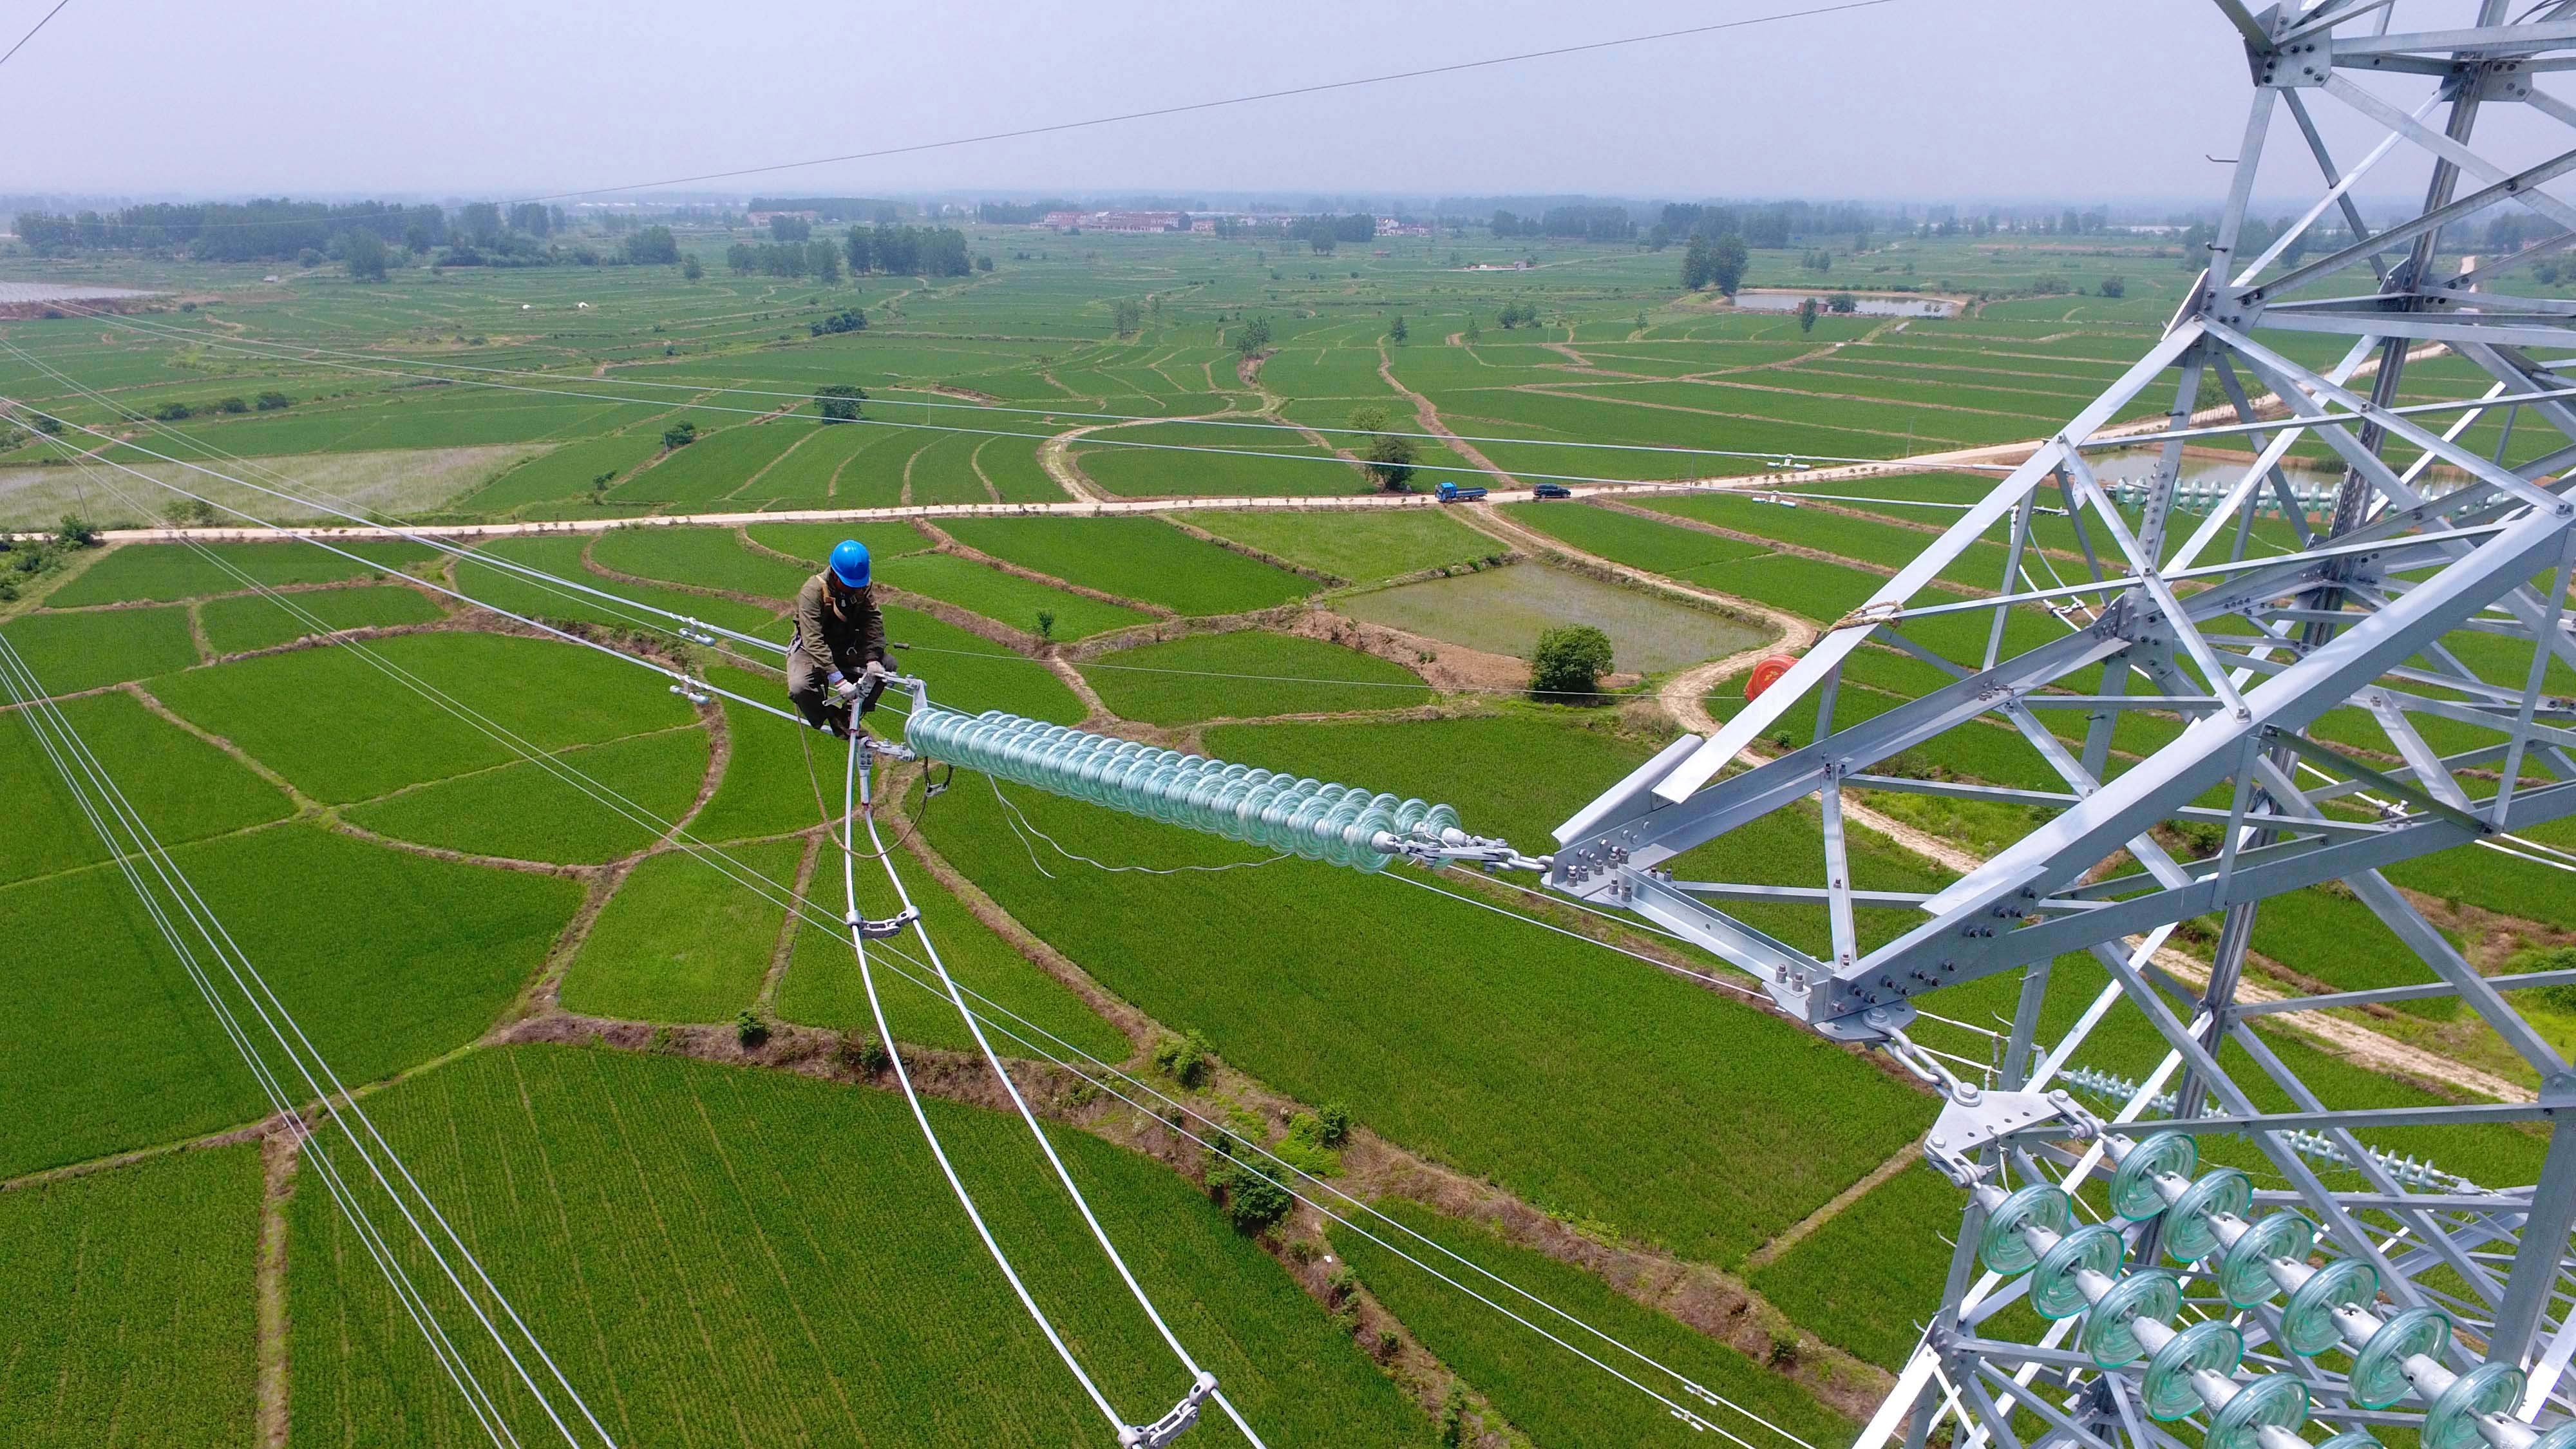 A worker checks power lines during maintenance in Laian, Anhui province in July. Market-based principles are increasingly subordinated to long-term national strategic ambitions. Photo: AFP